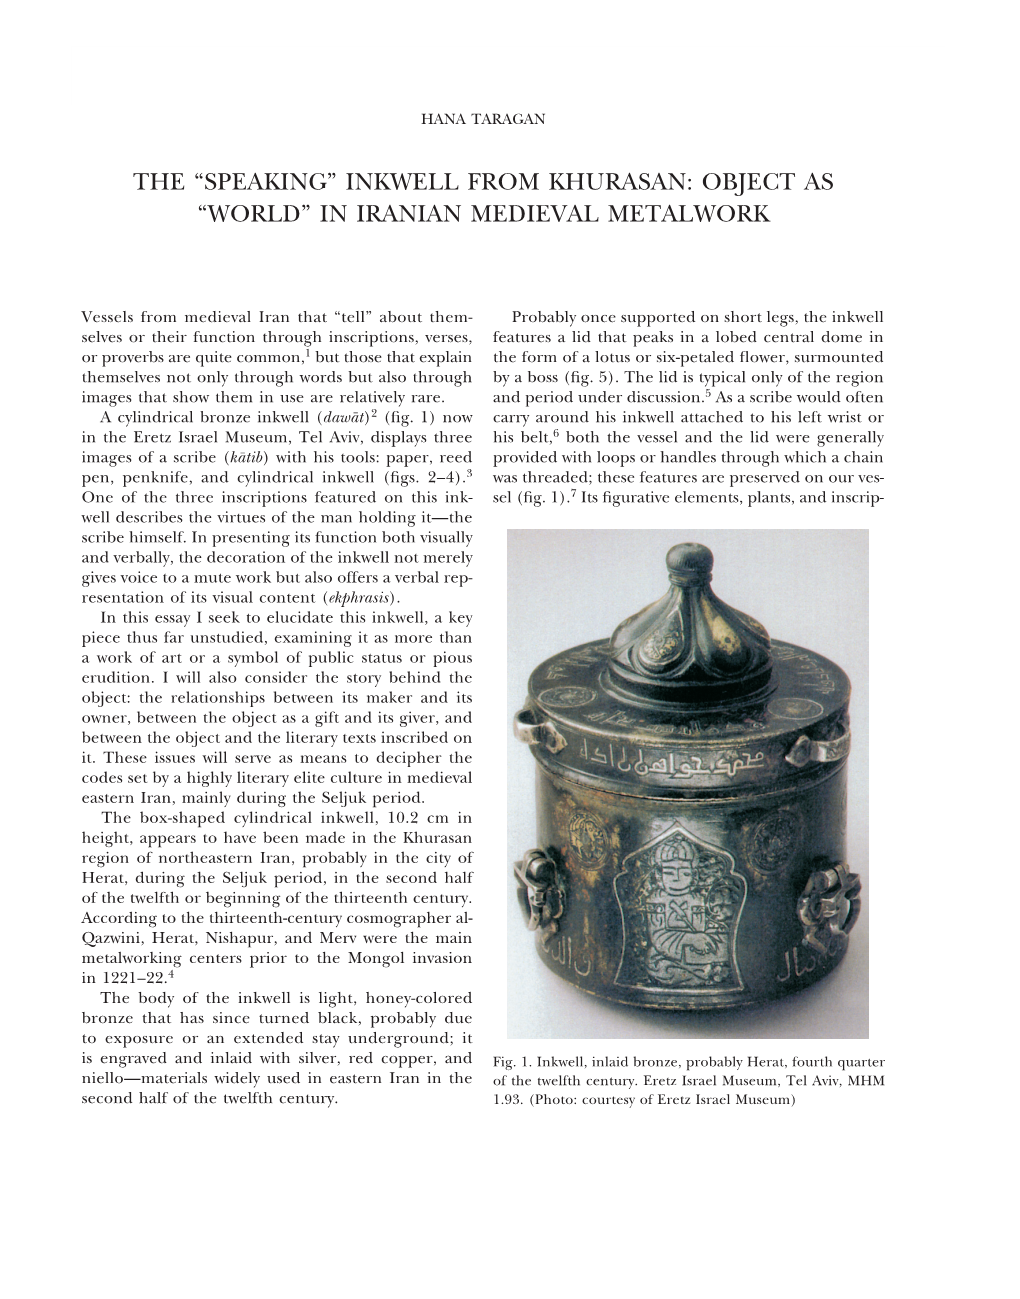 The “Speaking” Inkwell from Khurasan: Object As “World” in Iranian Medieval Metalwork